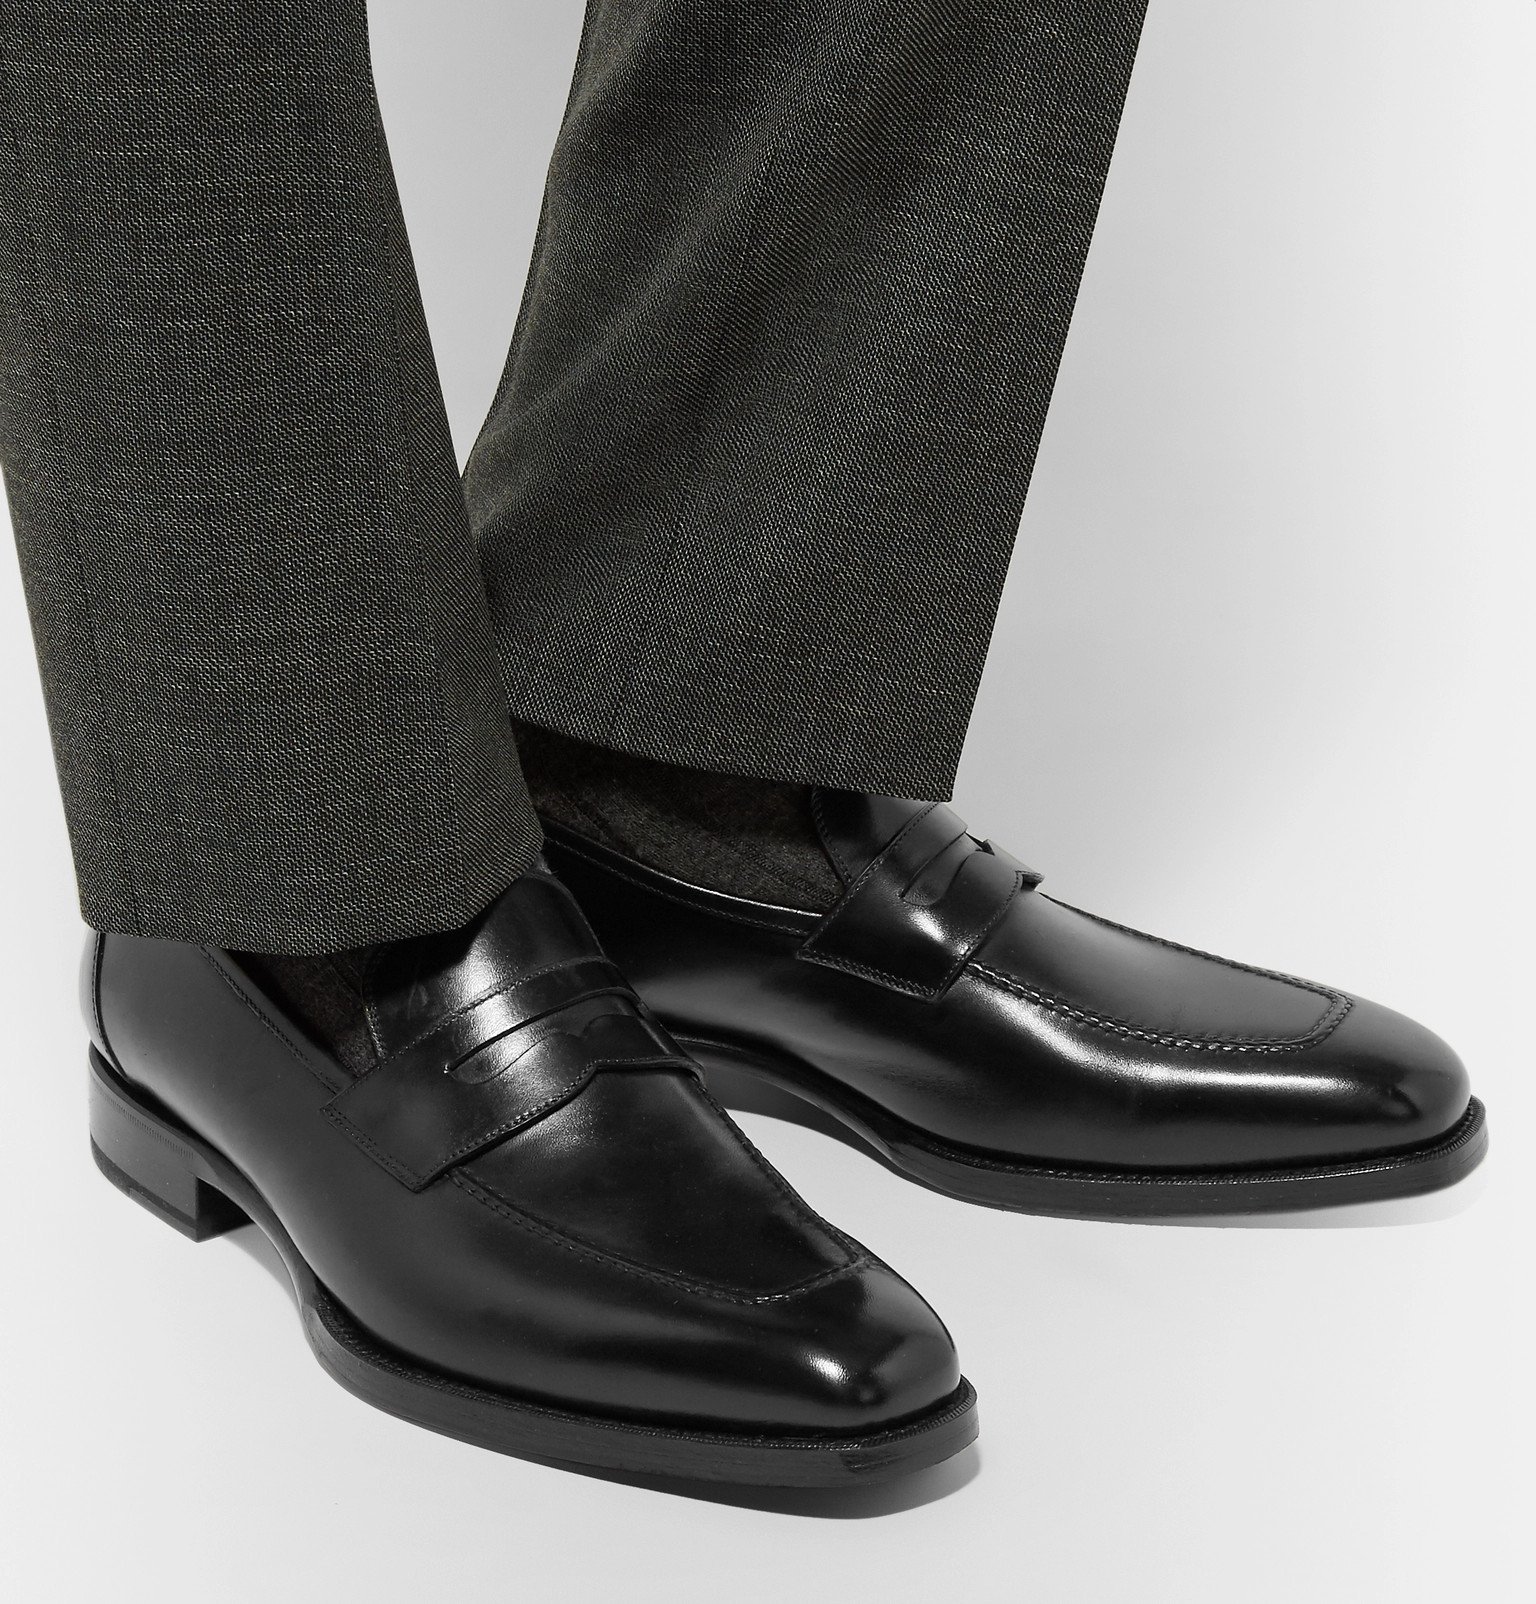 TOM FORD - Wessex Leather Penny Loafers - Black TOM FORD